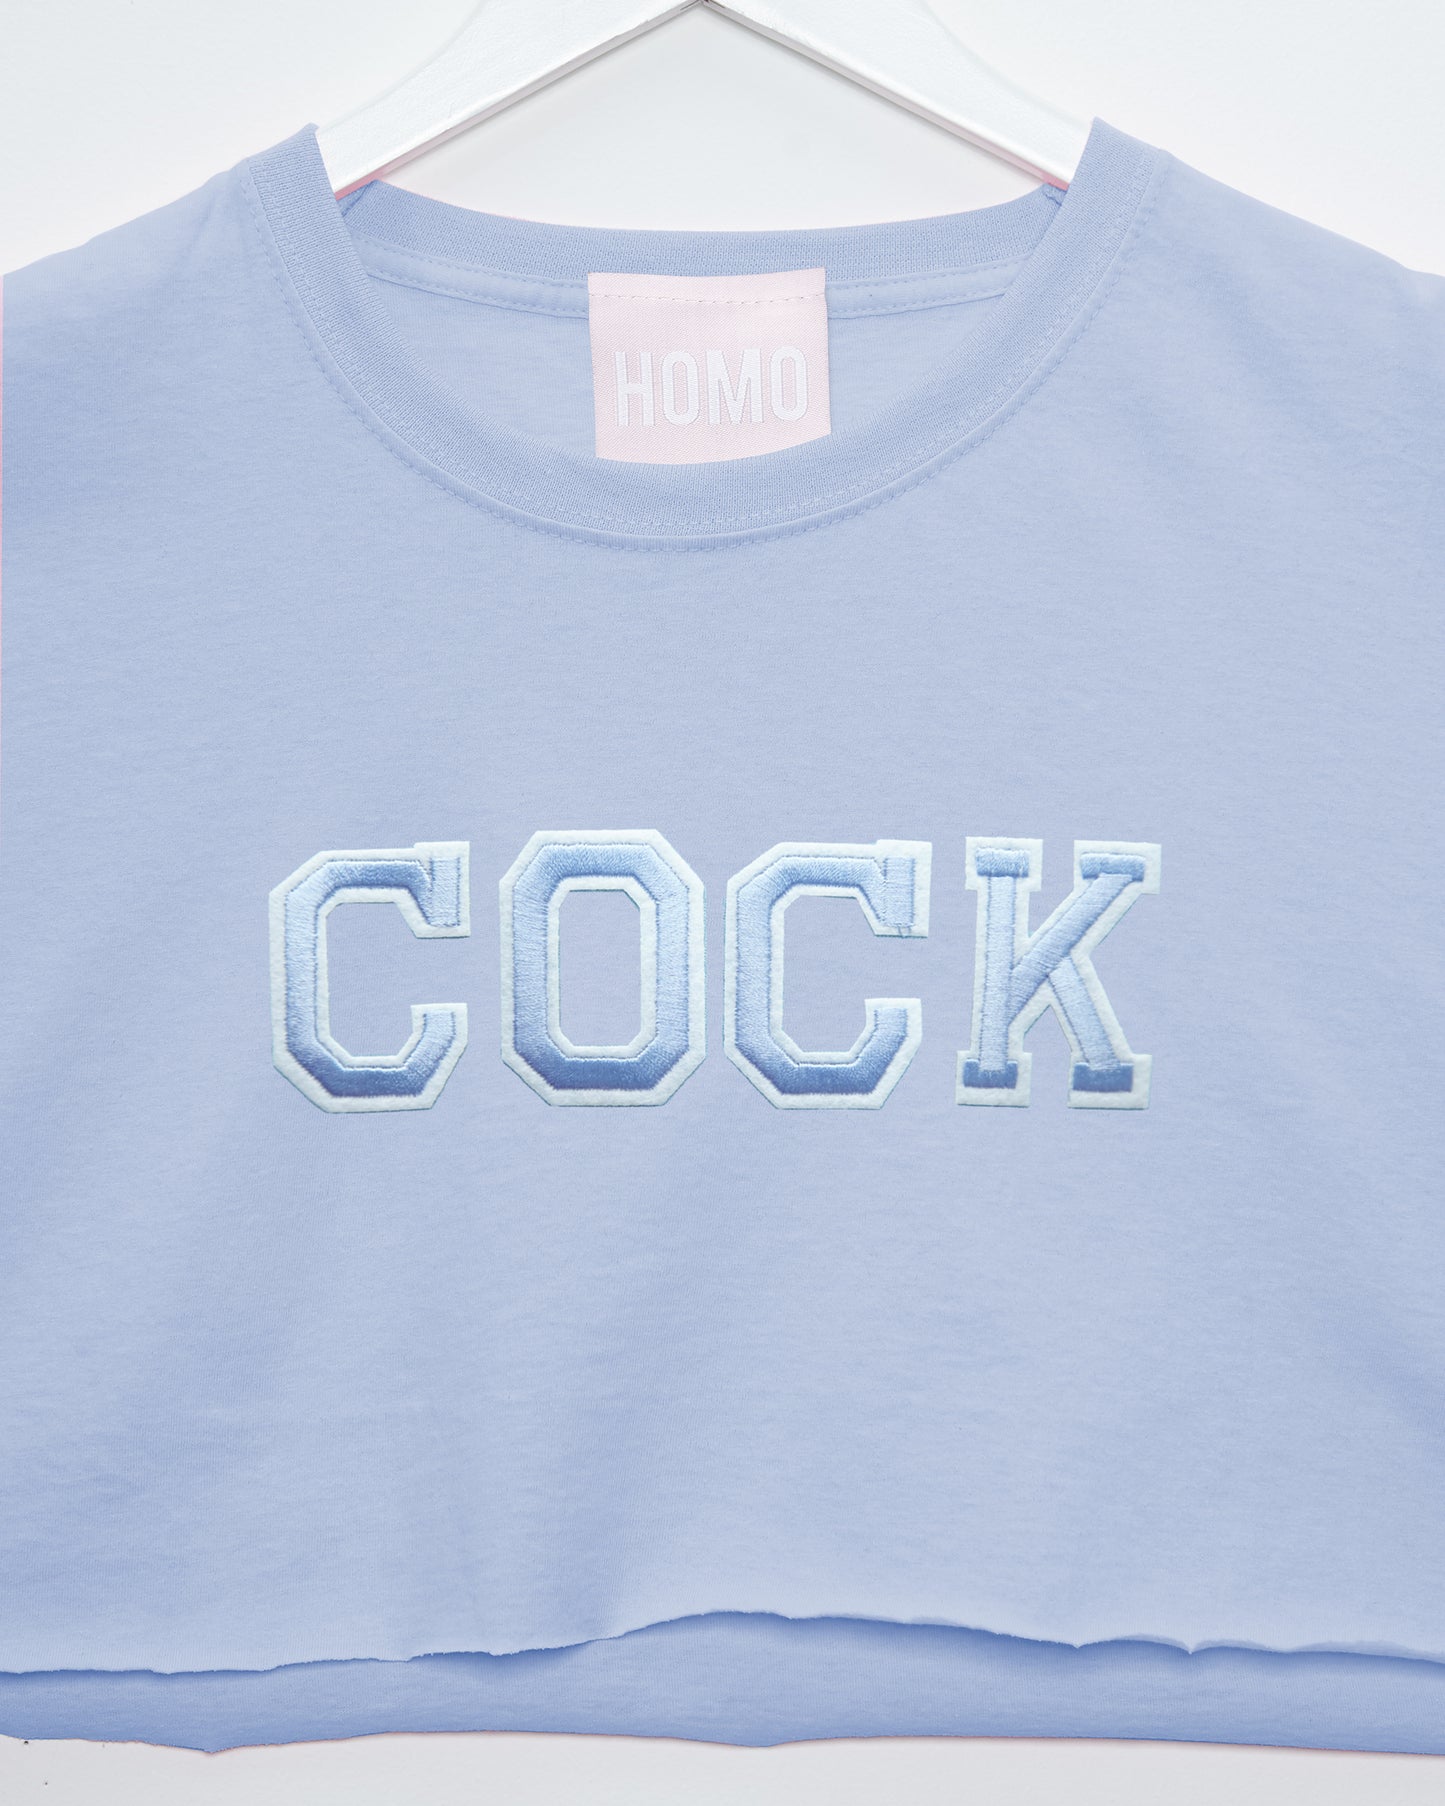 Varsity style cock embroidery on light blue - sleeveless crop top.